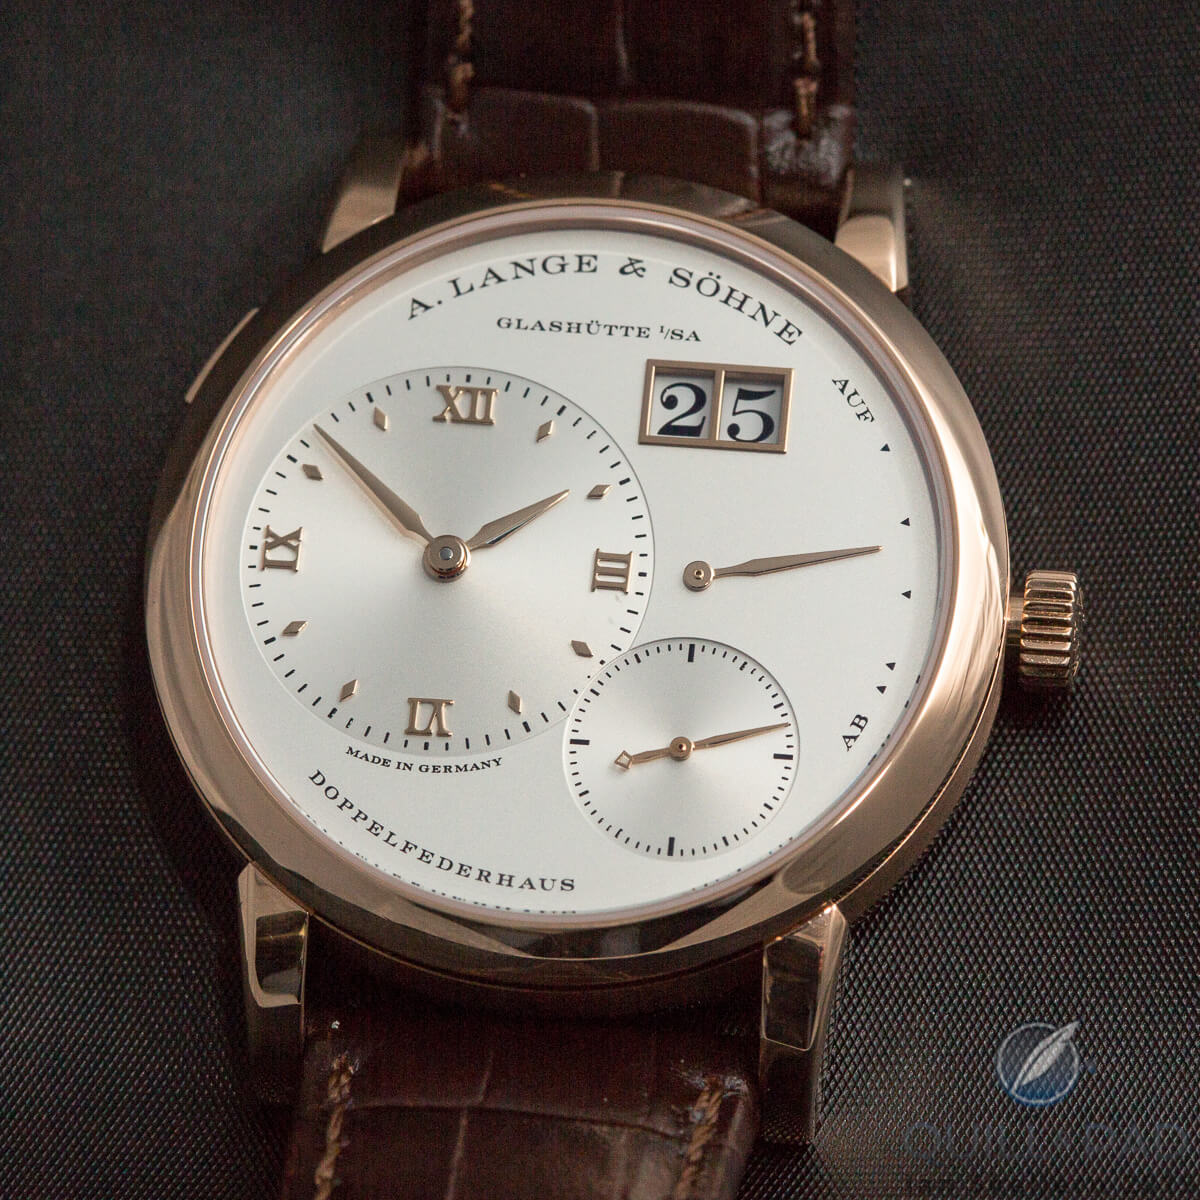 The updated Lange 1 by A. Lange & Söhne